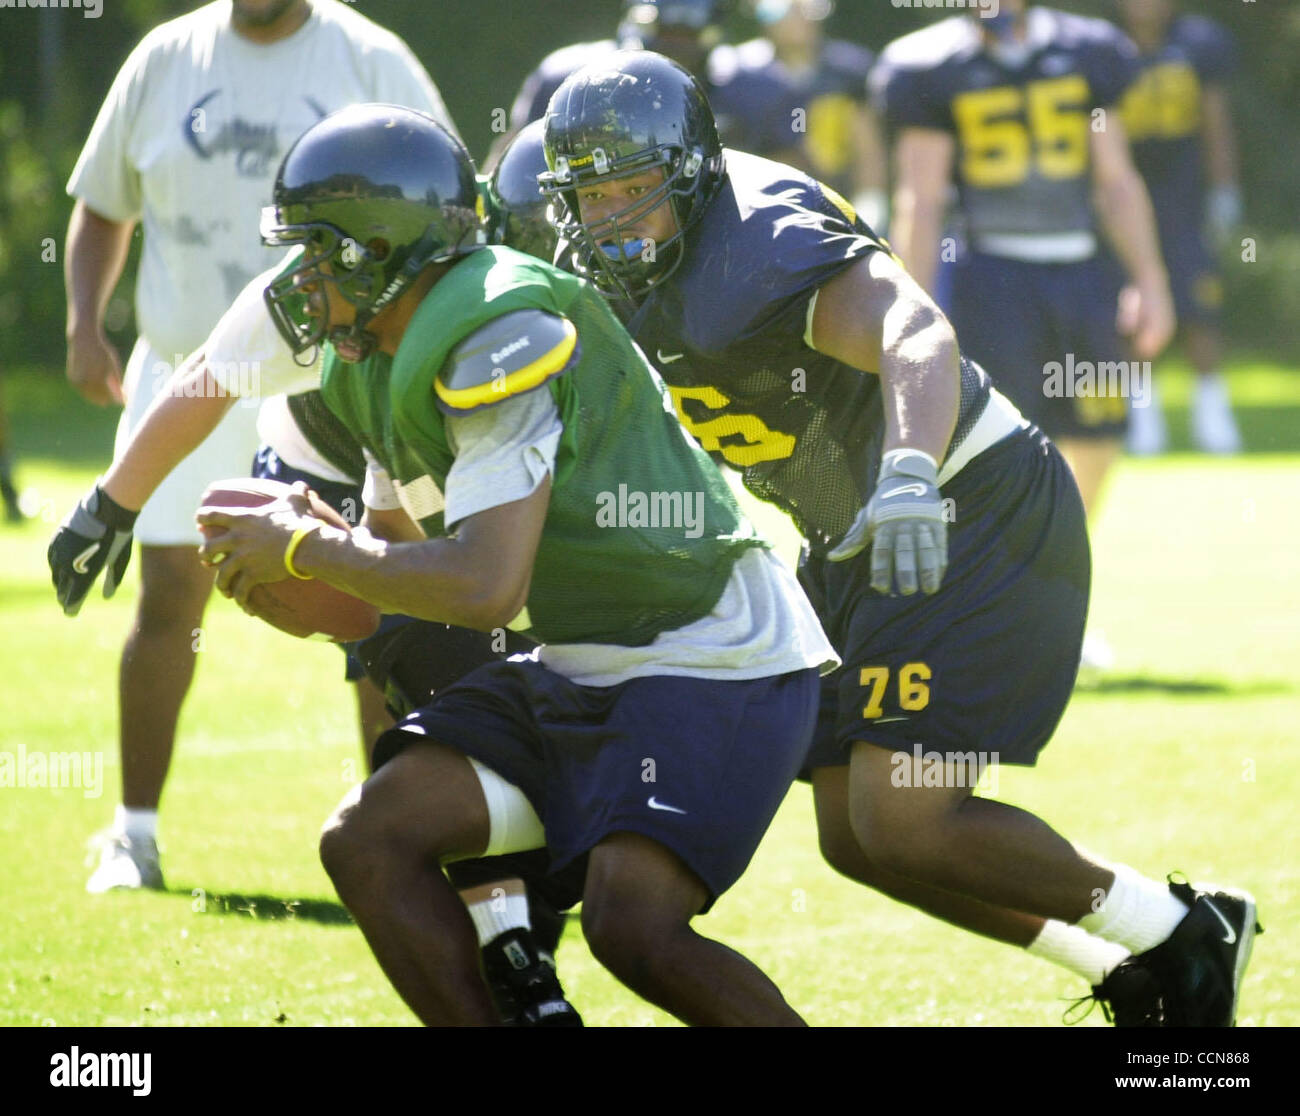 Cal defensive tackle Lorenzo Alexander keys in on a ball carrier during practice in Berkeley, Calif., on Friday, August 27, 2004.                    (Contra Costa Times/Mark DuFrene) Stock Photo